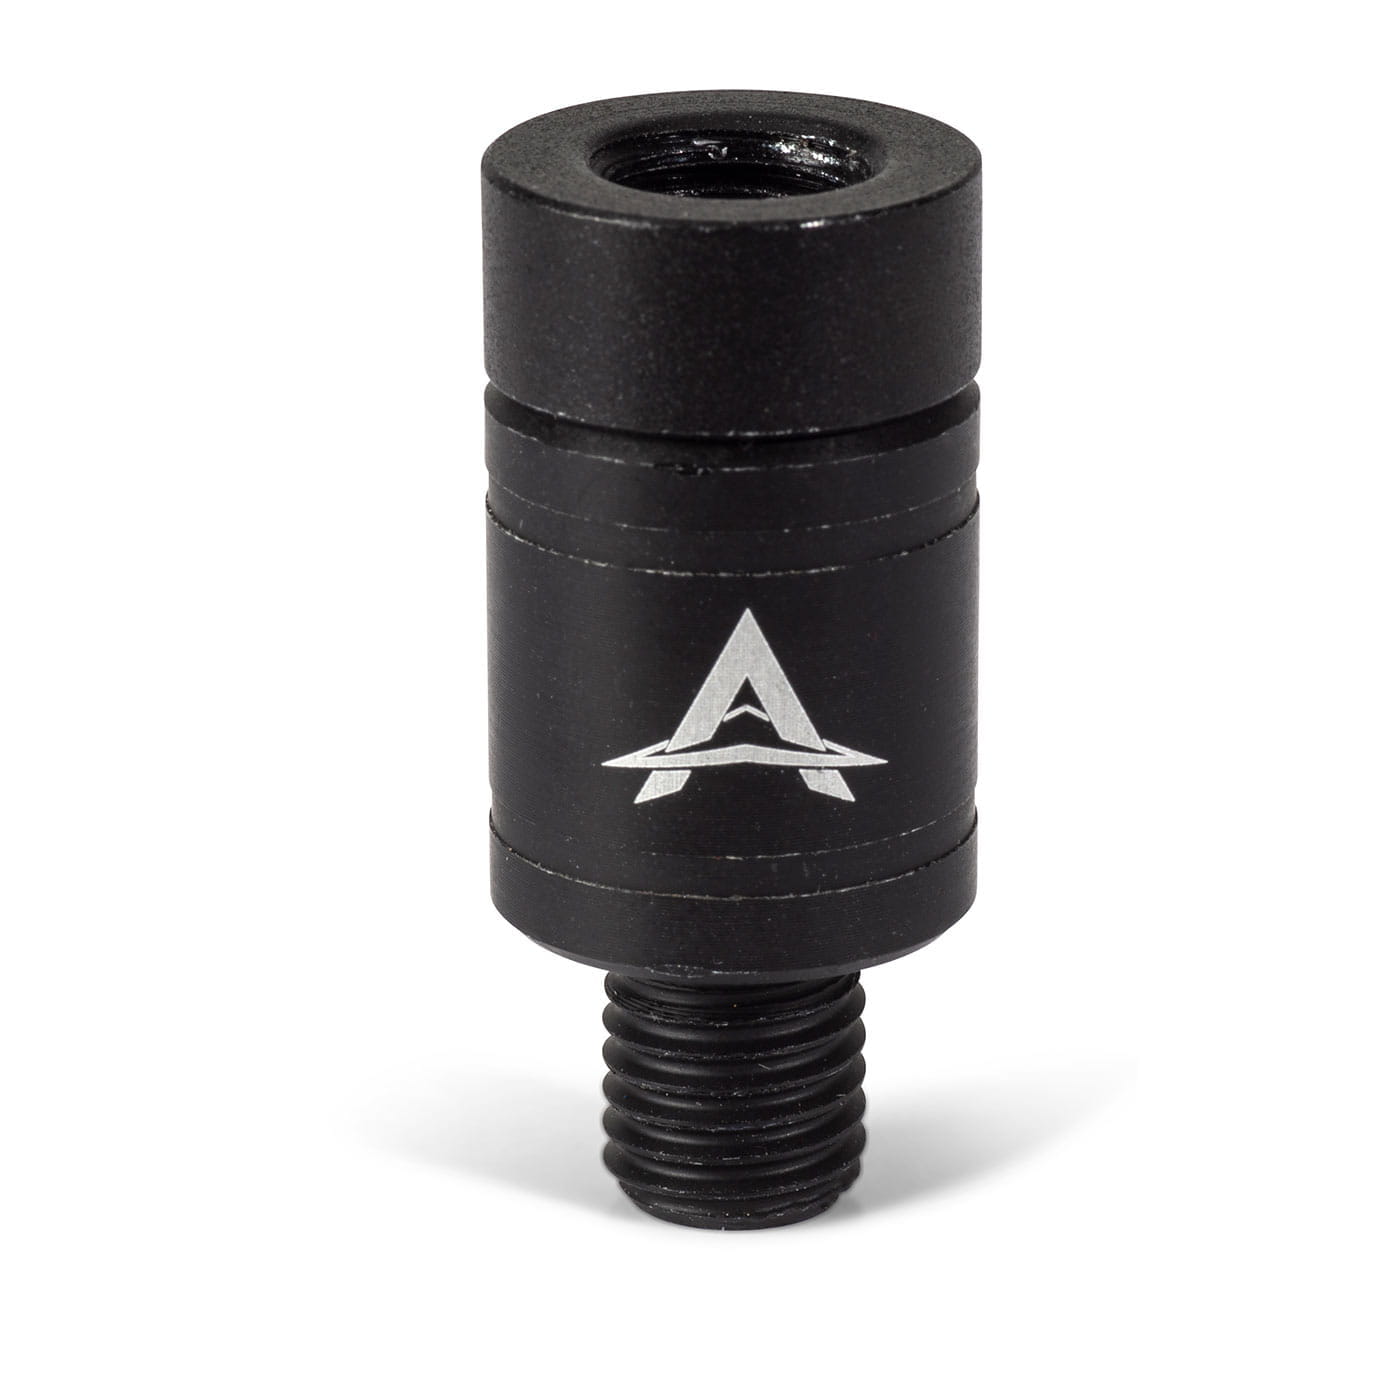 Magnet Connector Camou Black